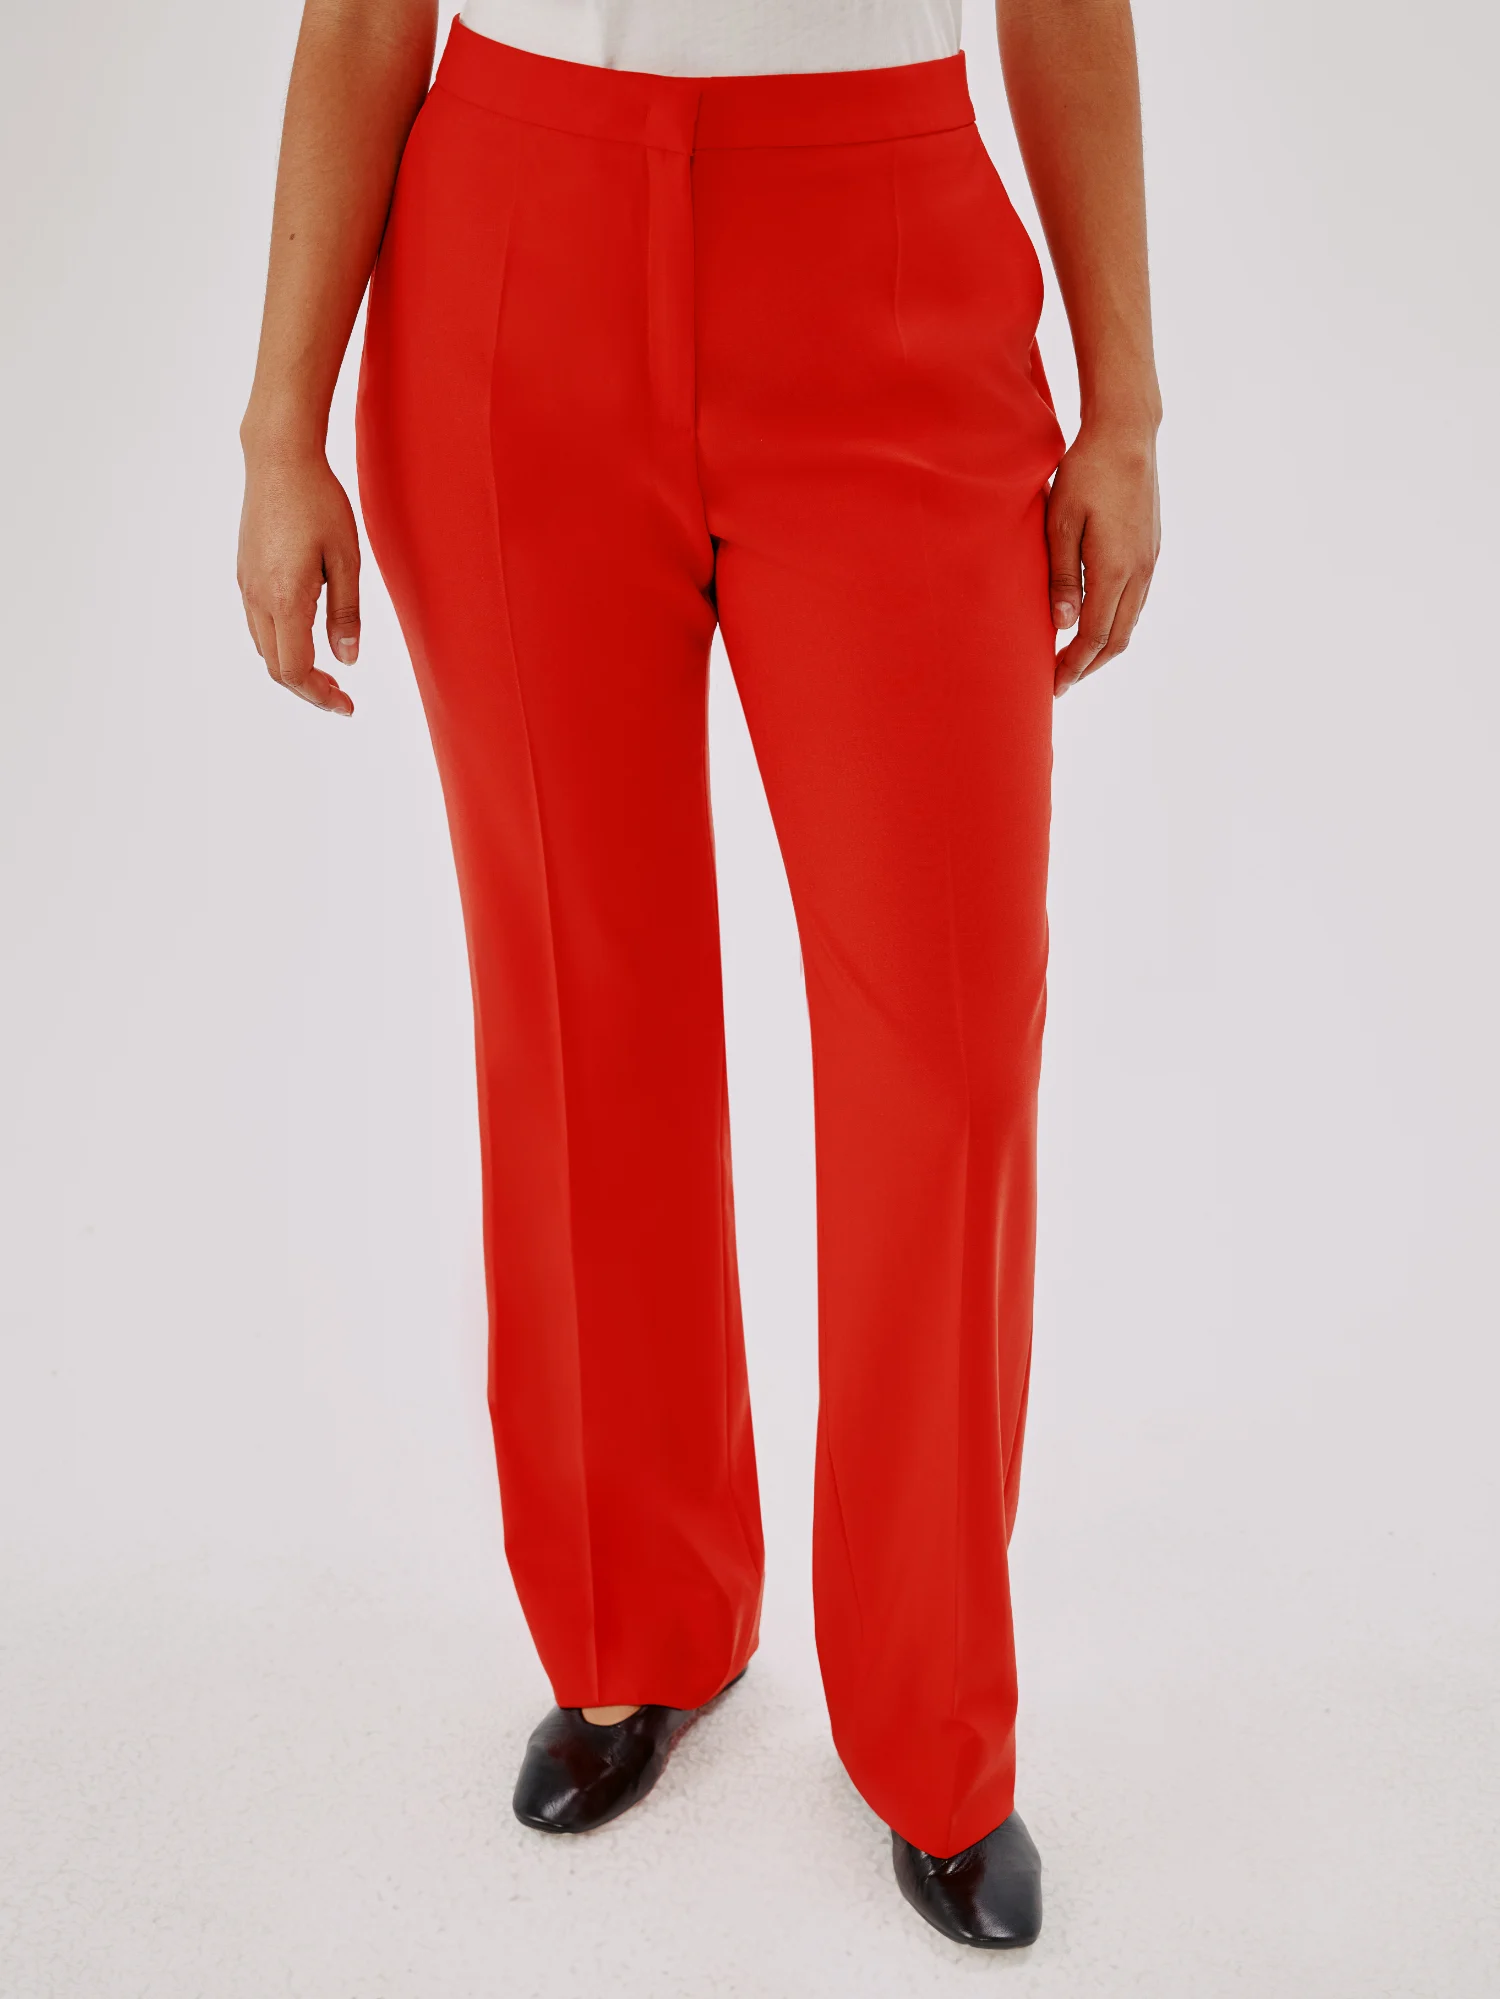 Loose Fitting High Waisted Slacks，Women's Business Casual Work Pants  Trousers，Stylish and Comfortable (Color : Apricot, Size : Small) at   Women's Clothing store